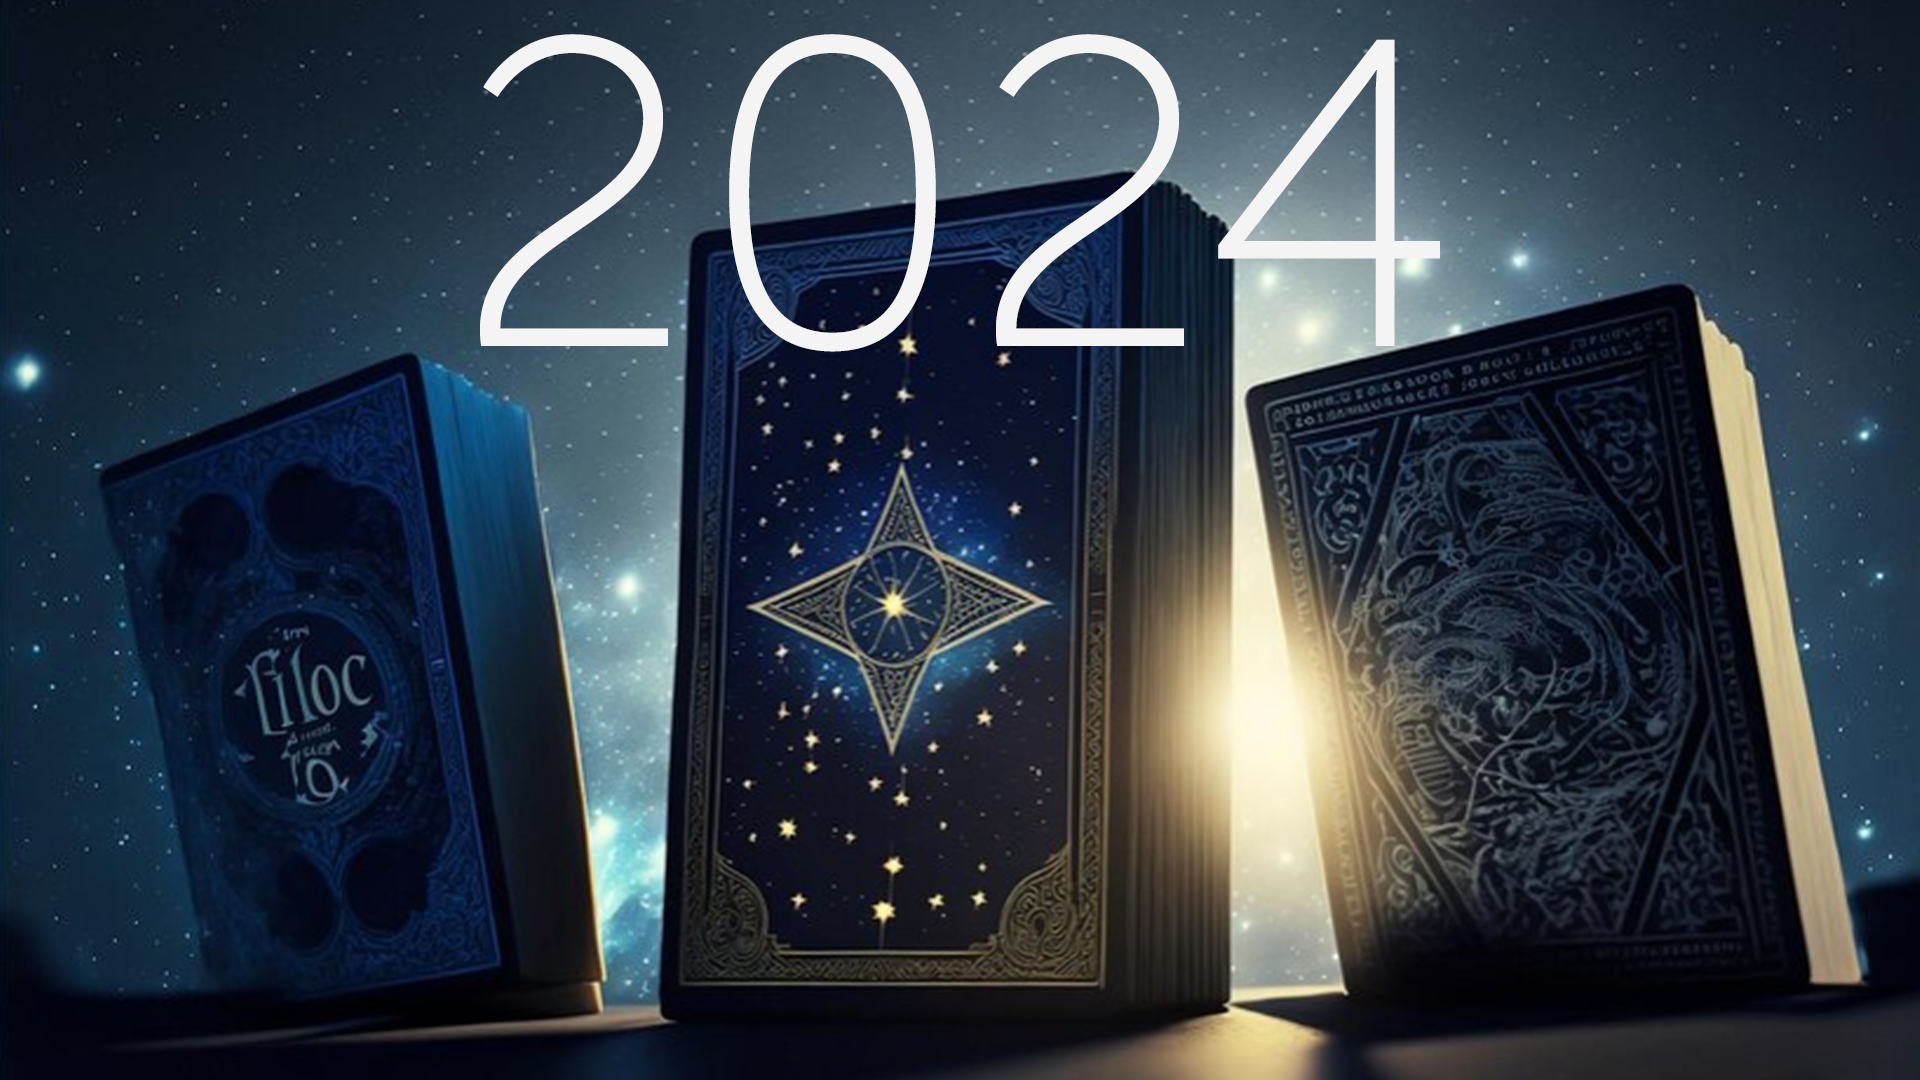 You are currently viewing Mit üzen a tarot kártya 2024-re?